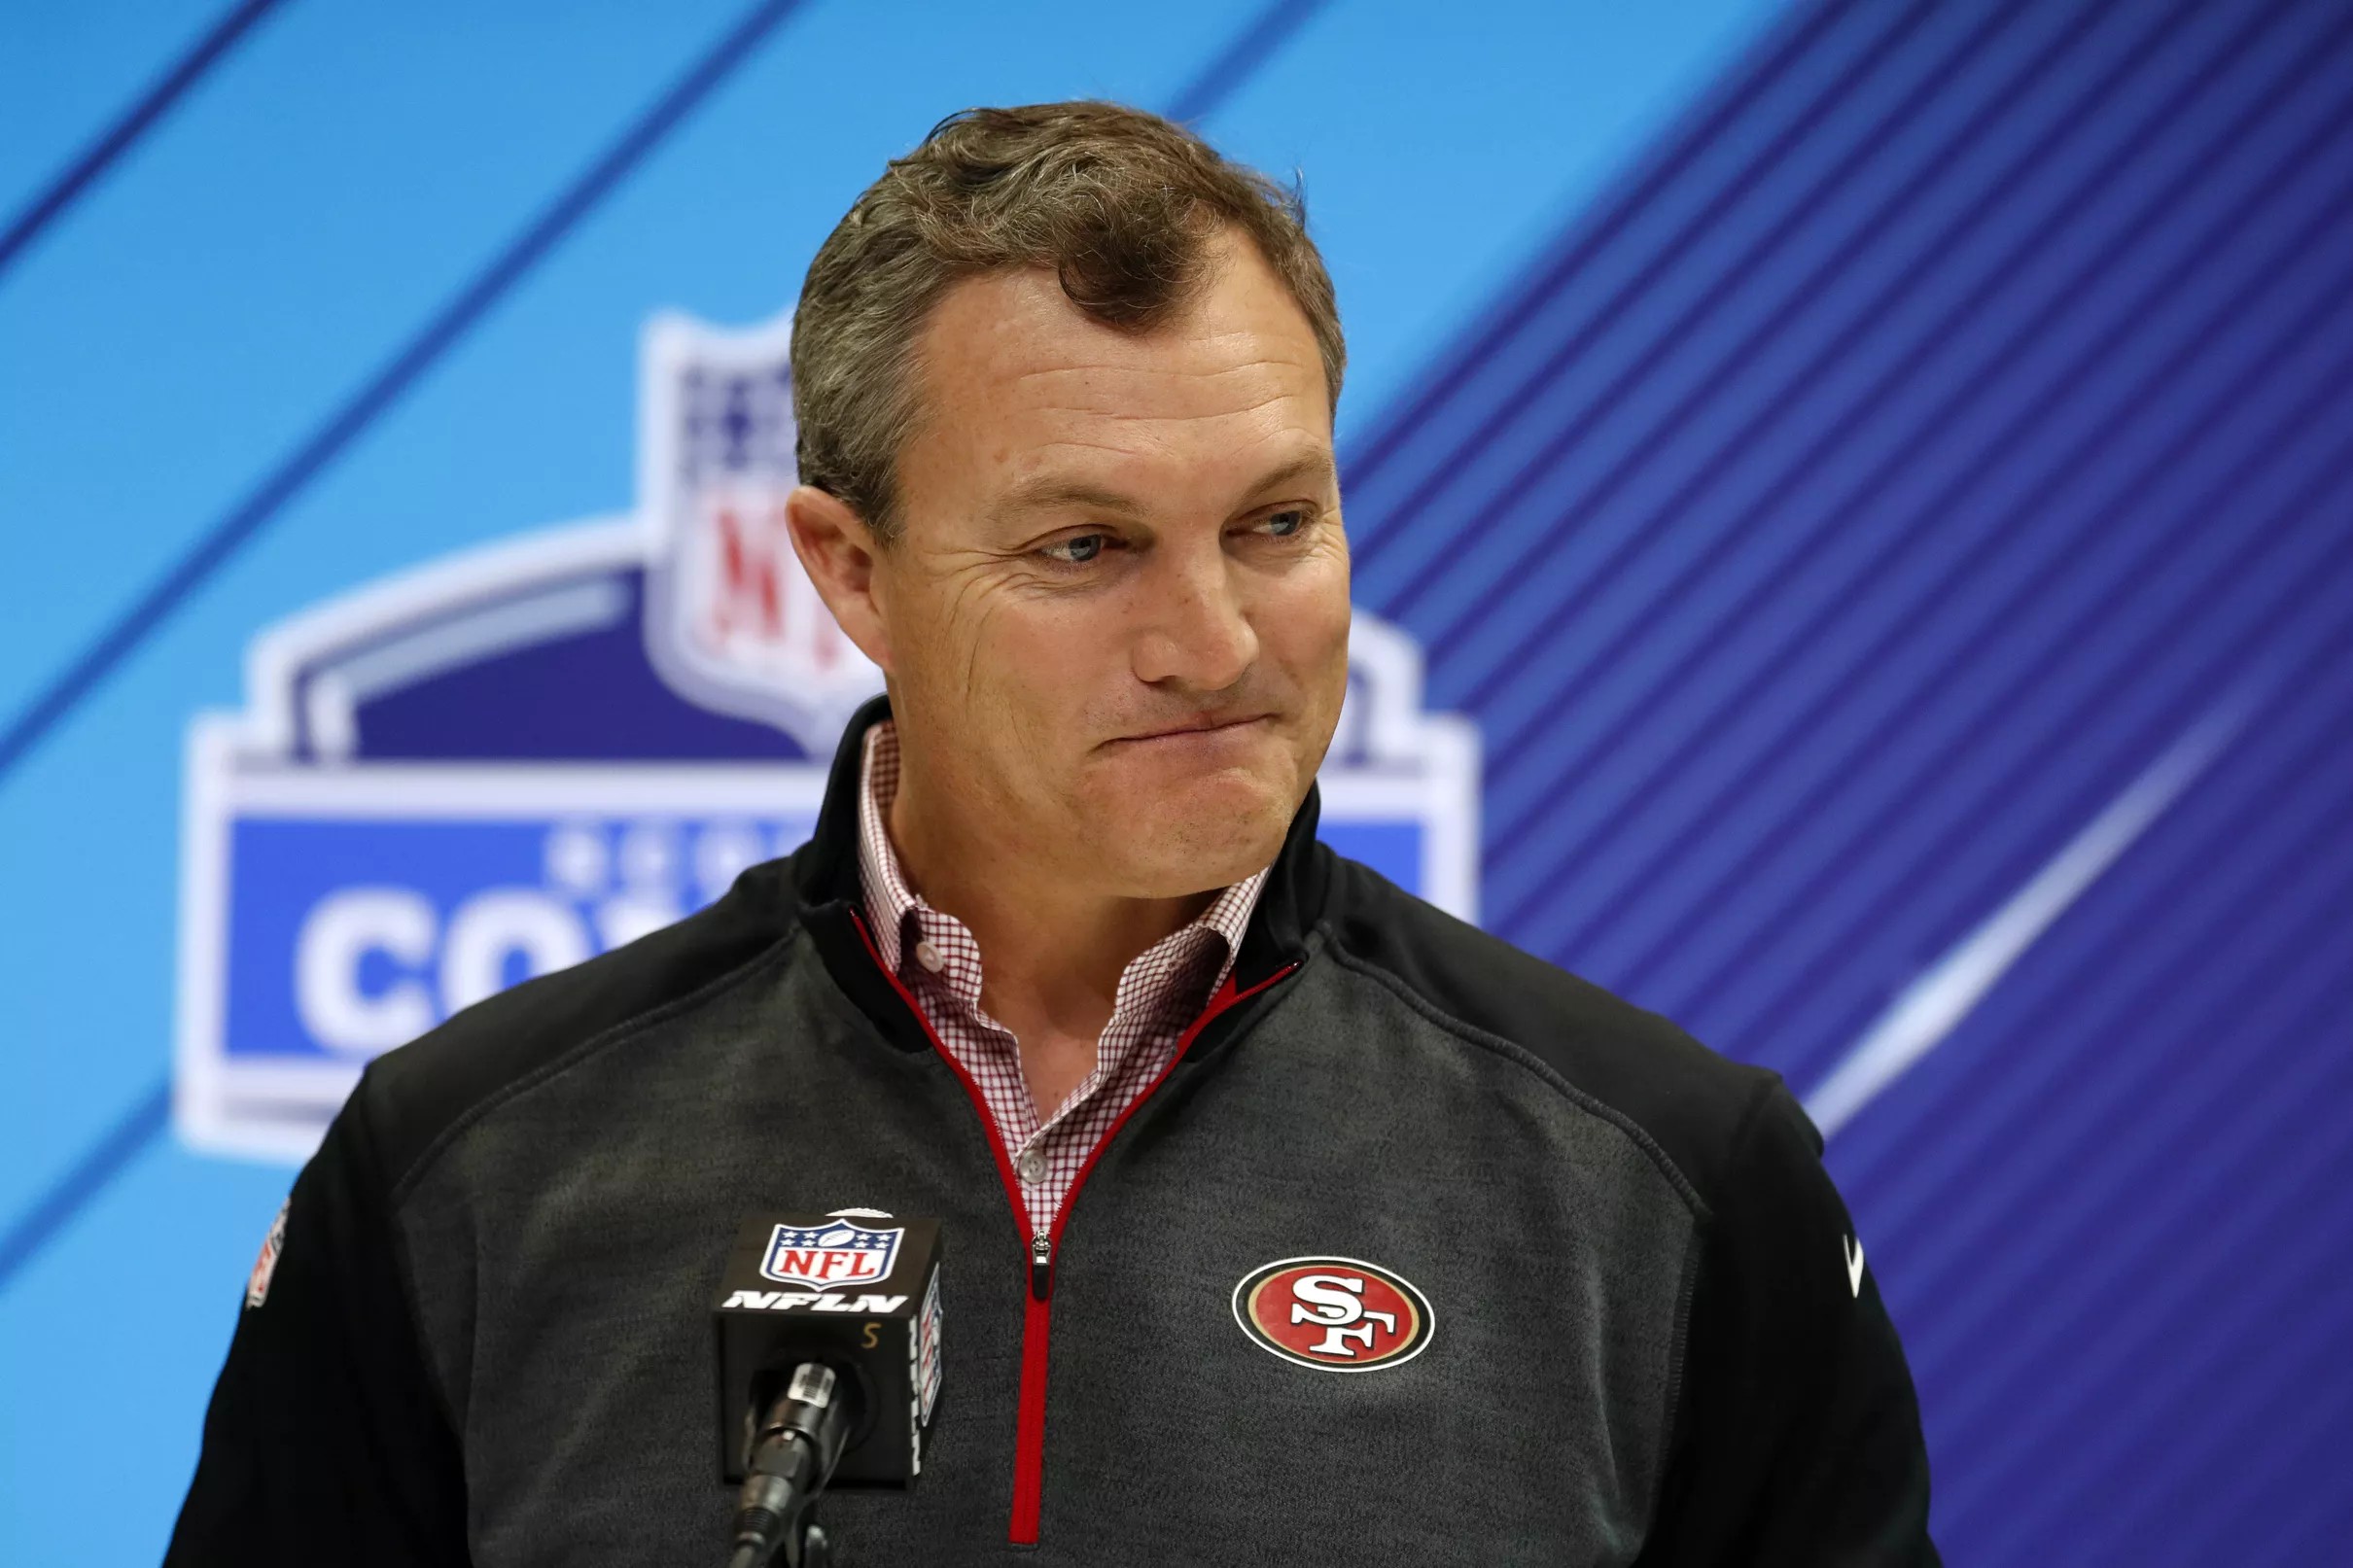 John Lynch: “The draft could go in many directions”